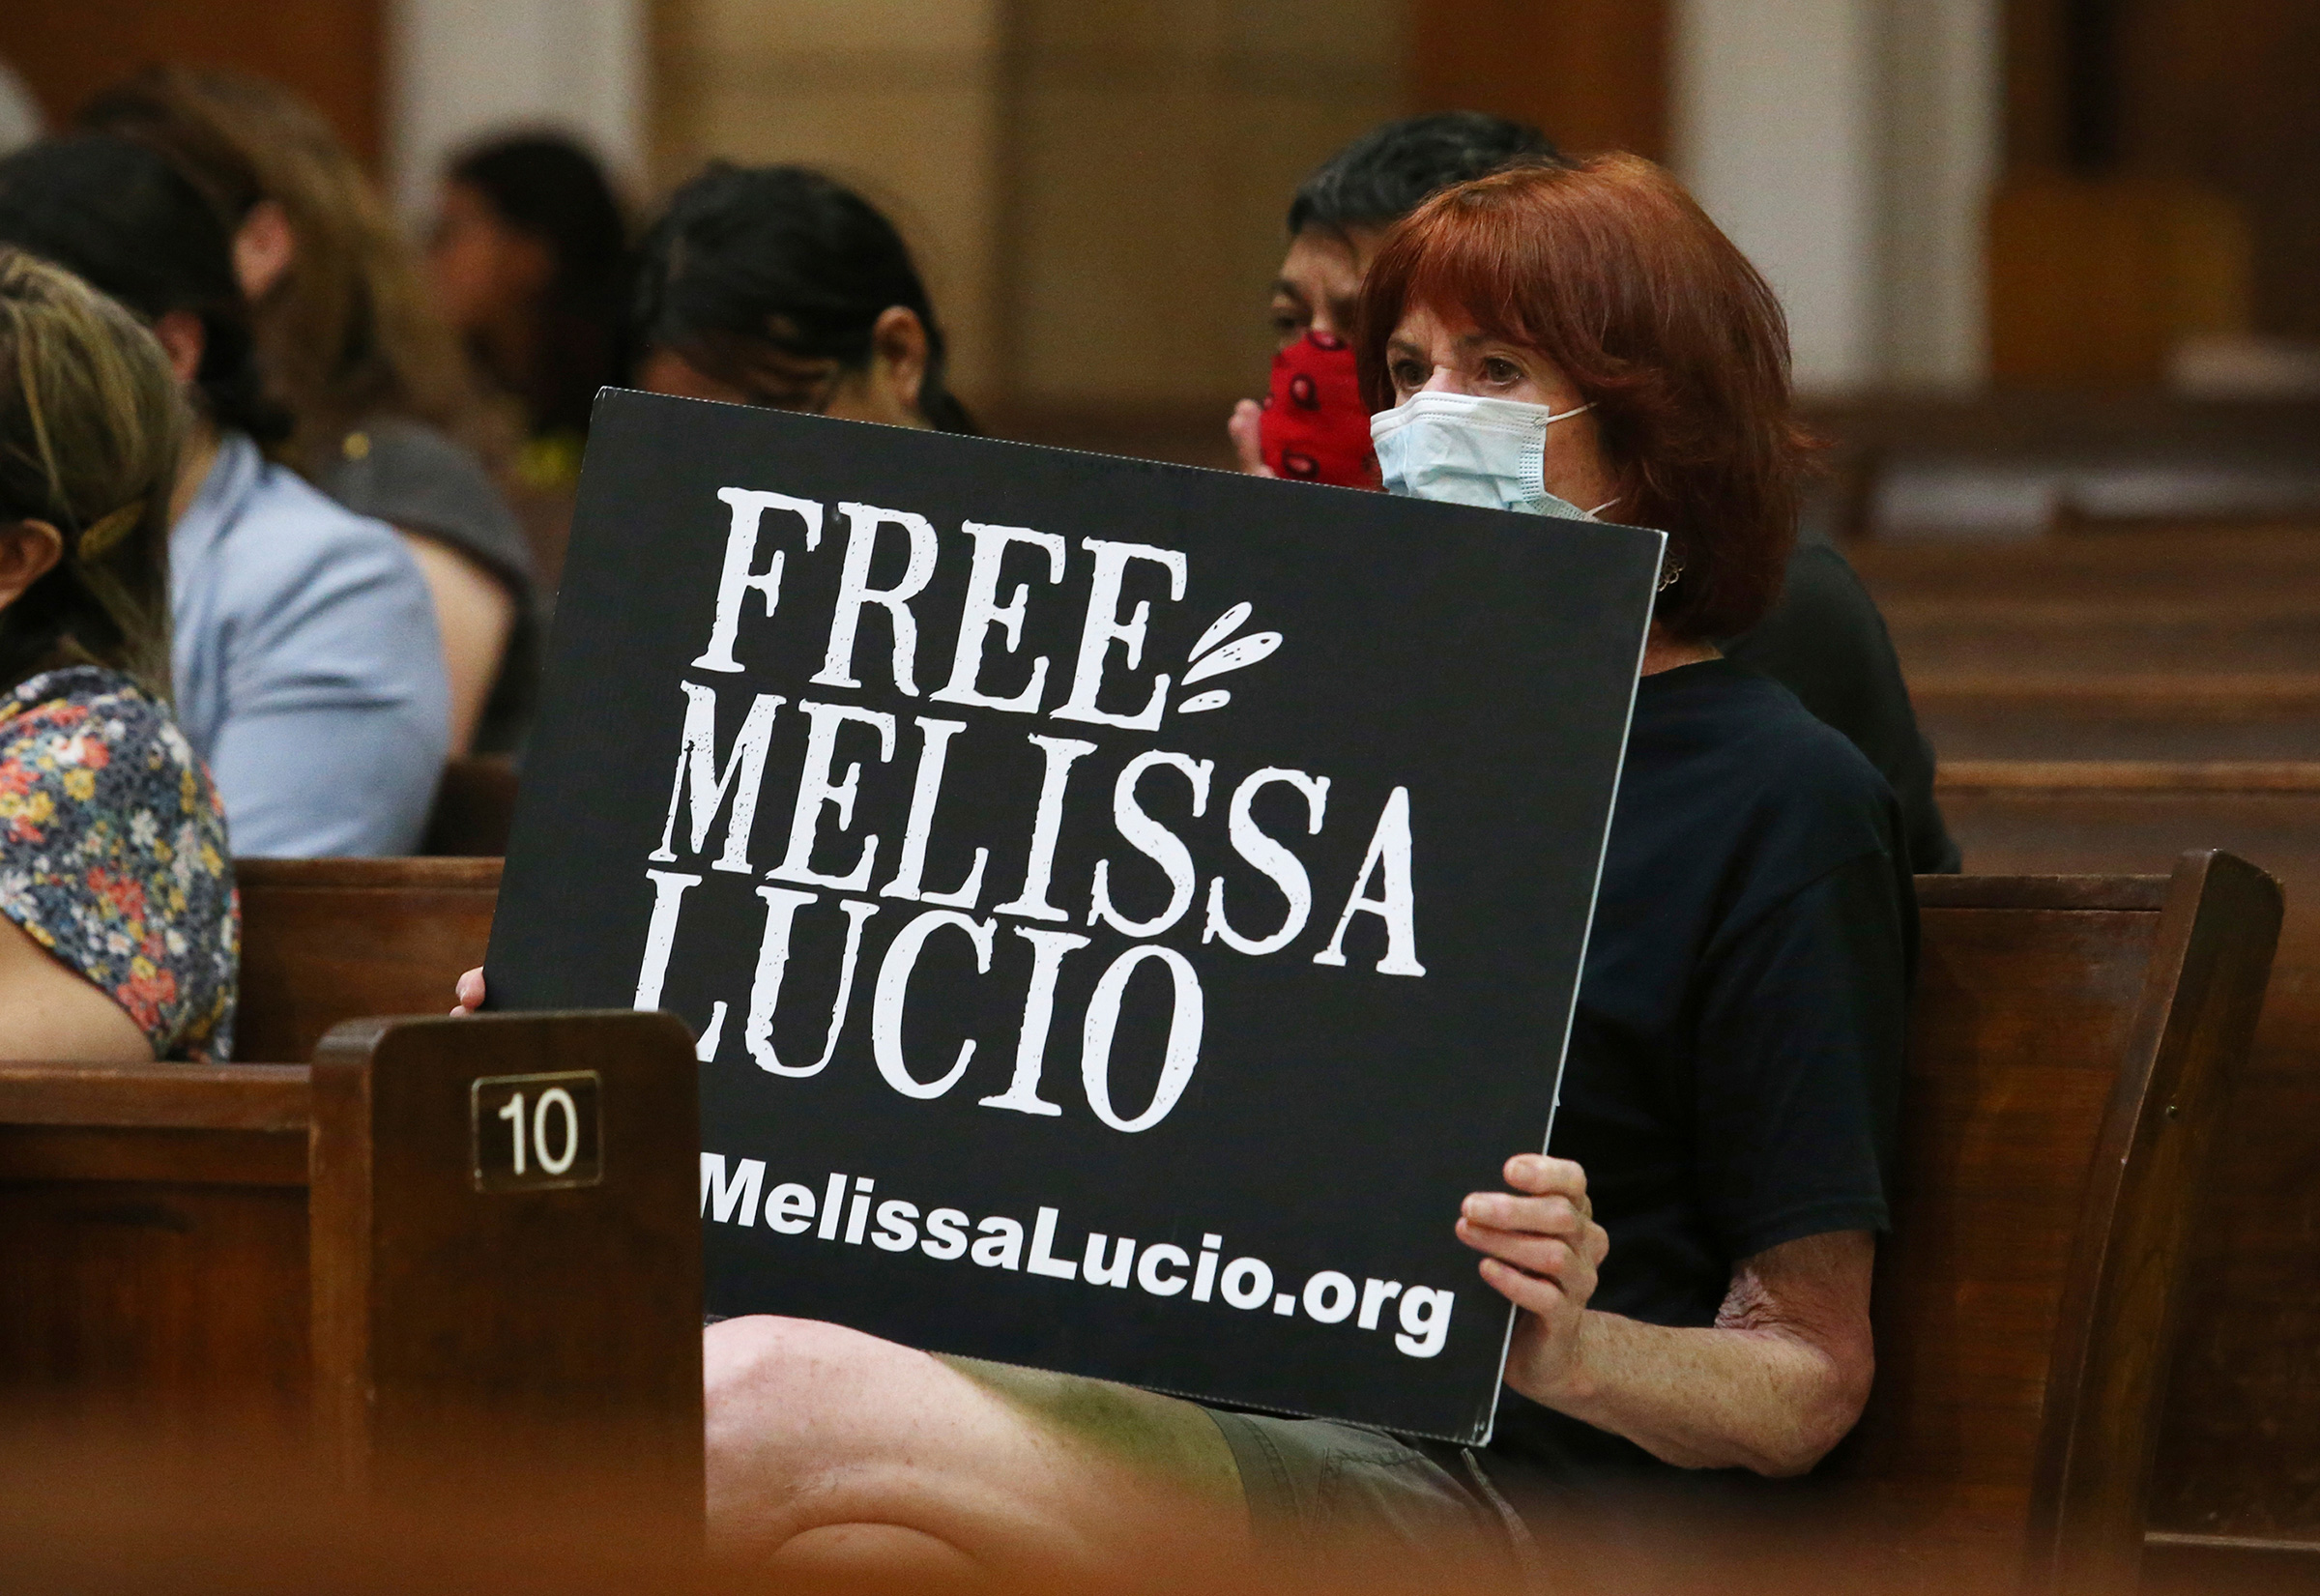 Rachelle Zoca attend a vigil for Melissa Lucio at the Basilica Of Our Lady of San Juan del Valle National Shrine in San Juan, Texas, on April 22, 2022.